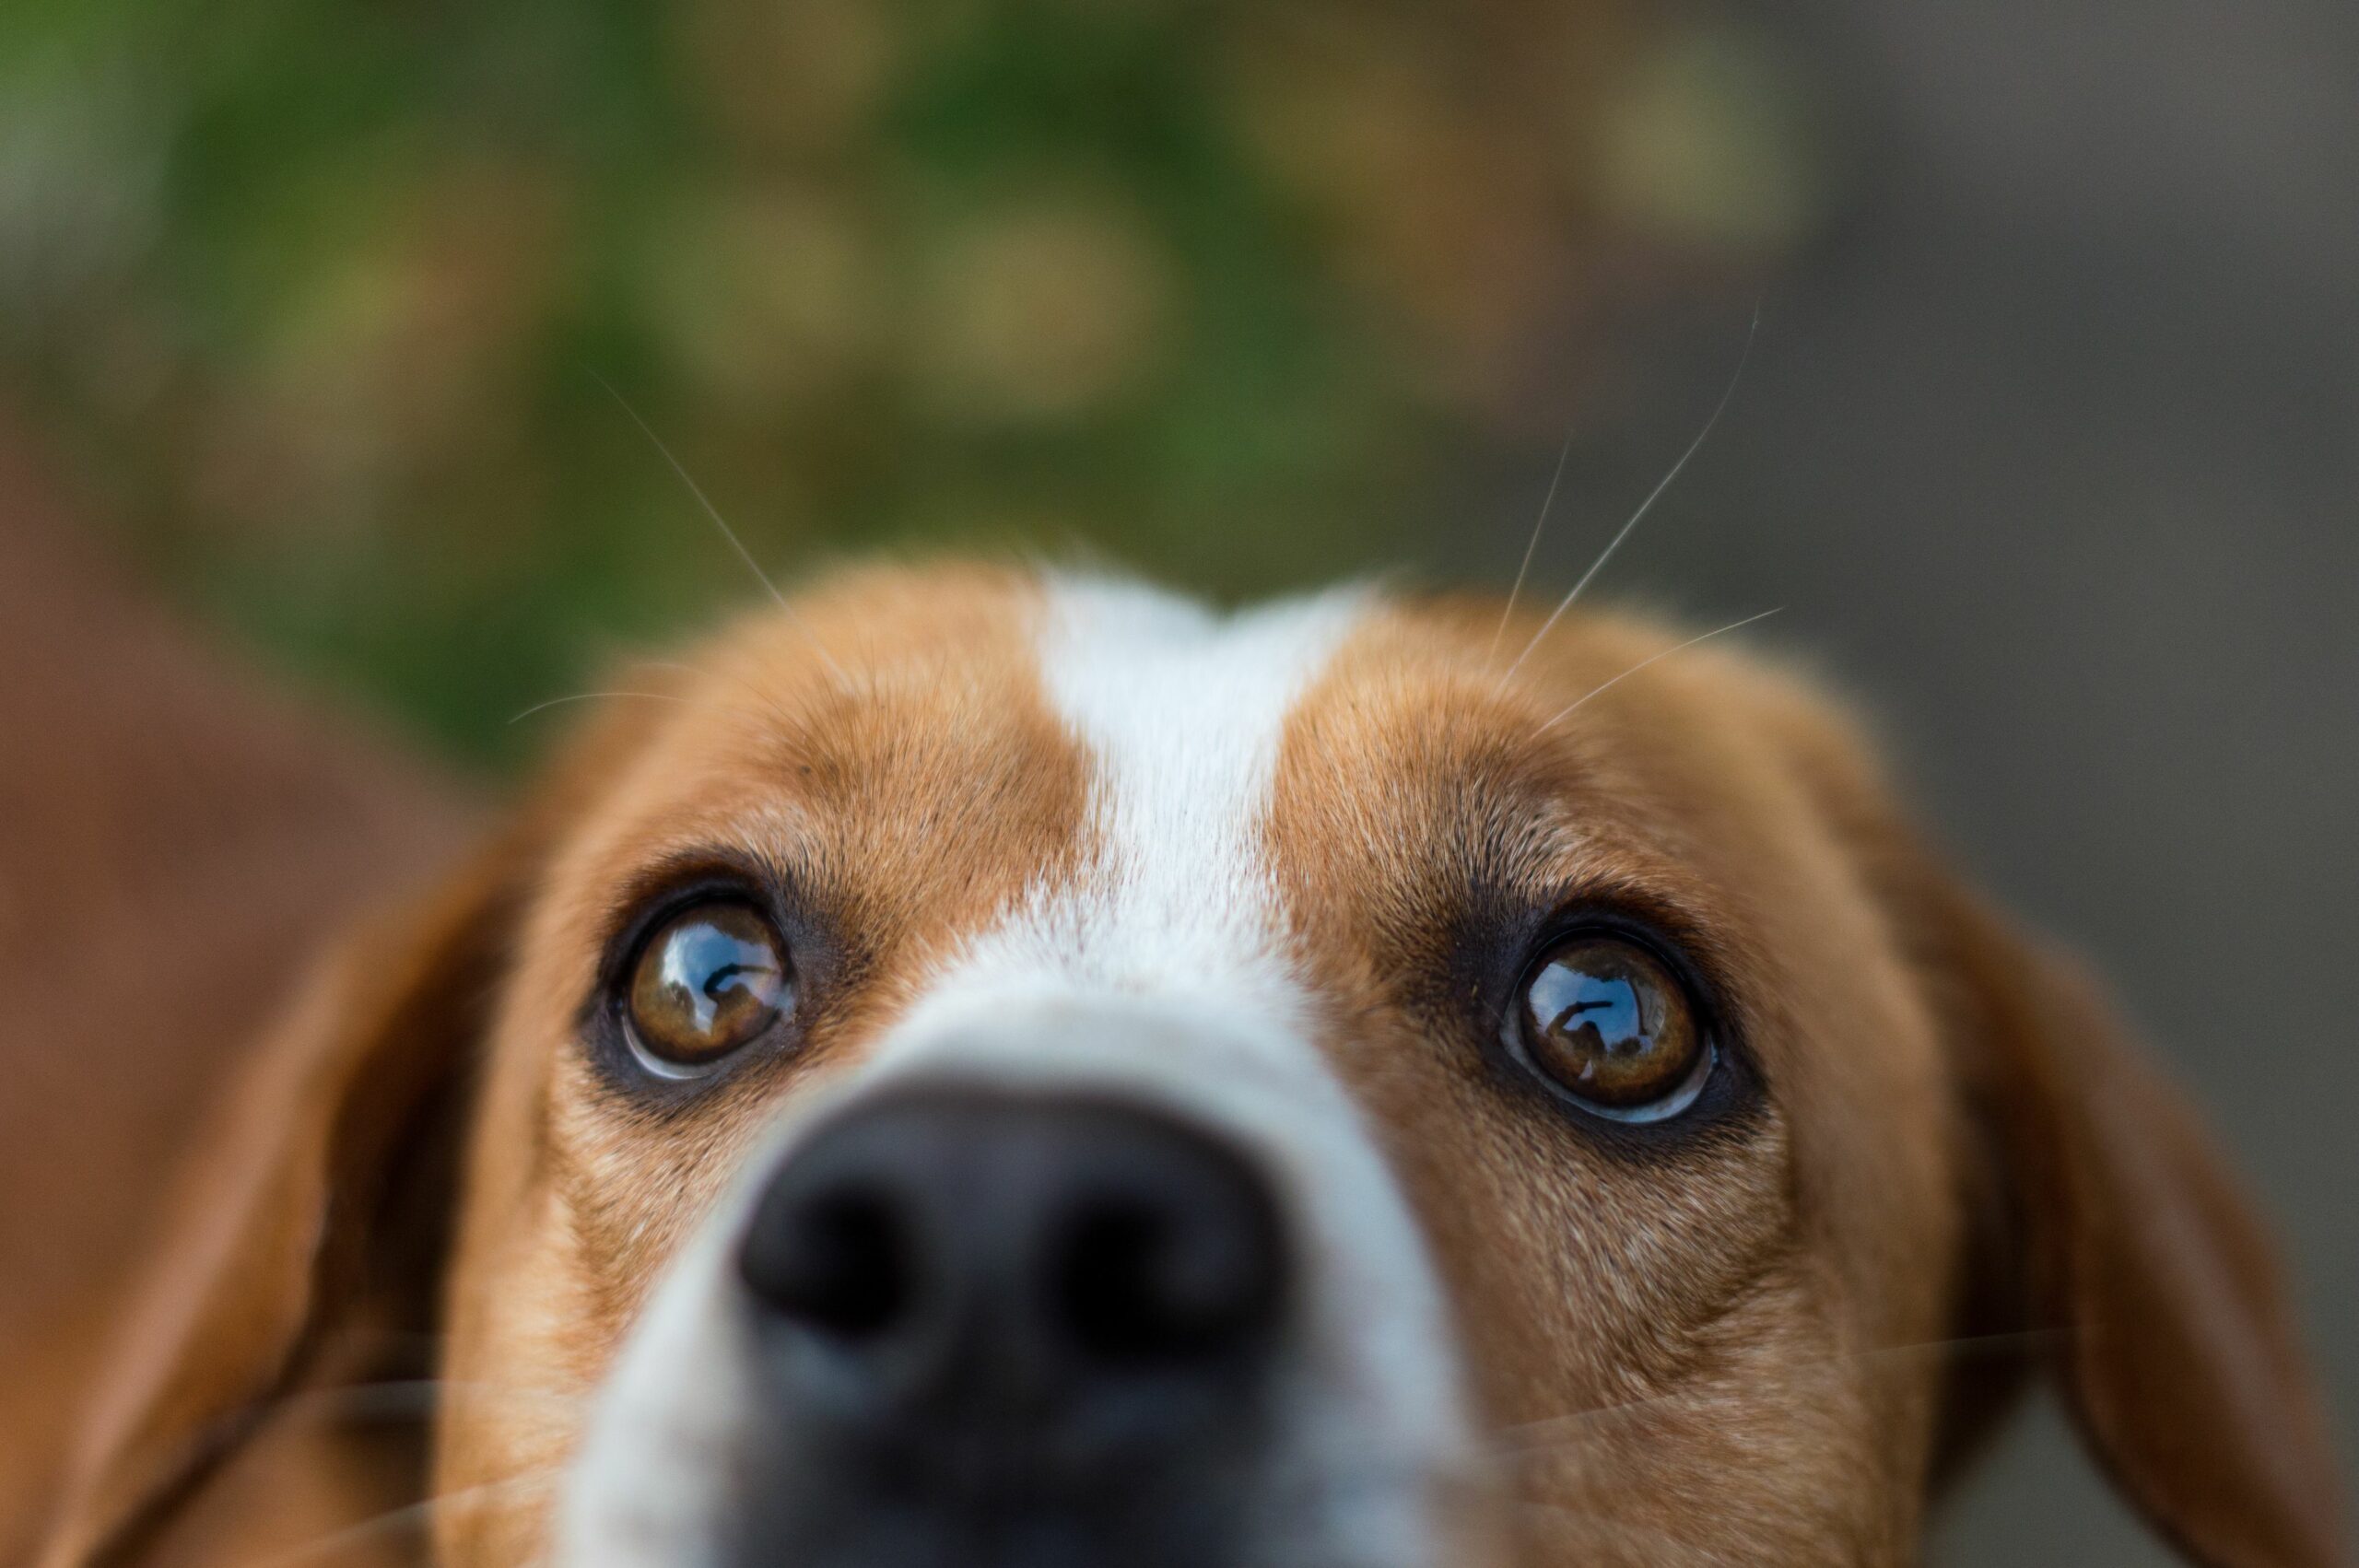 Can a dog's scratched eye heal on its own?